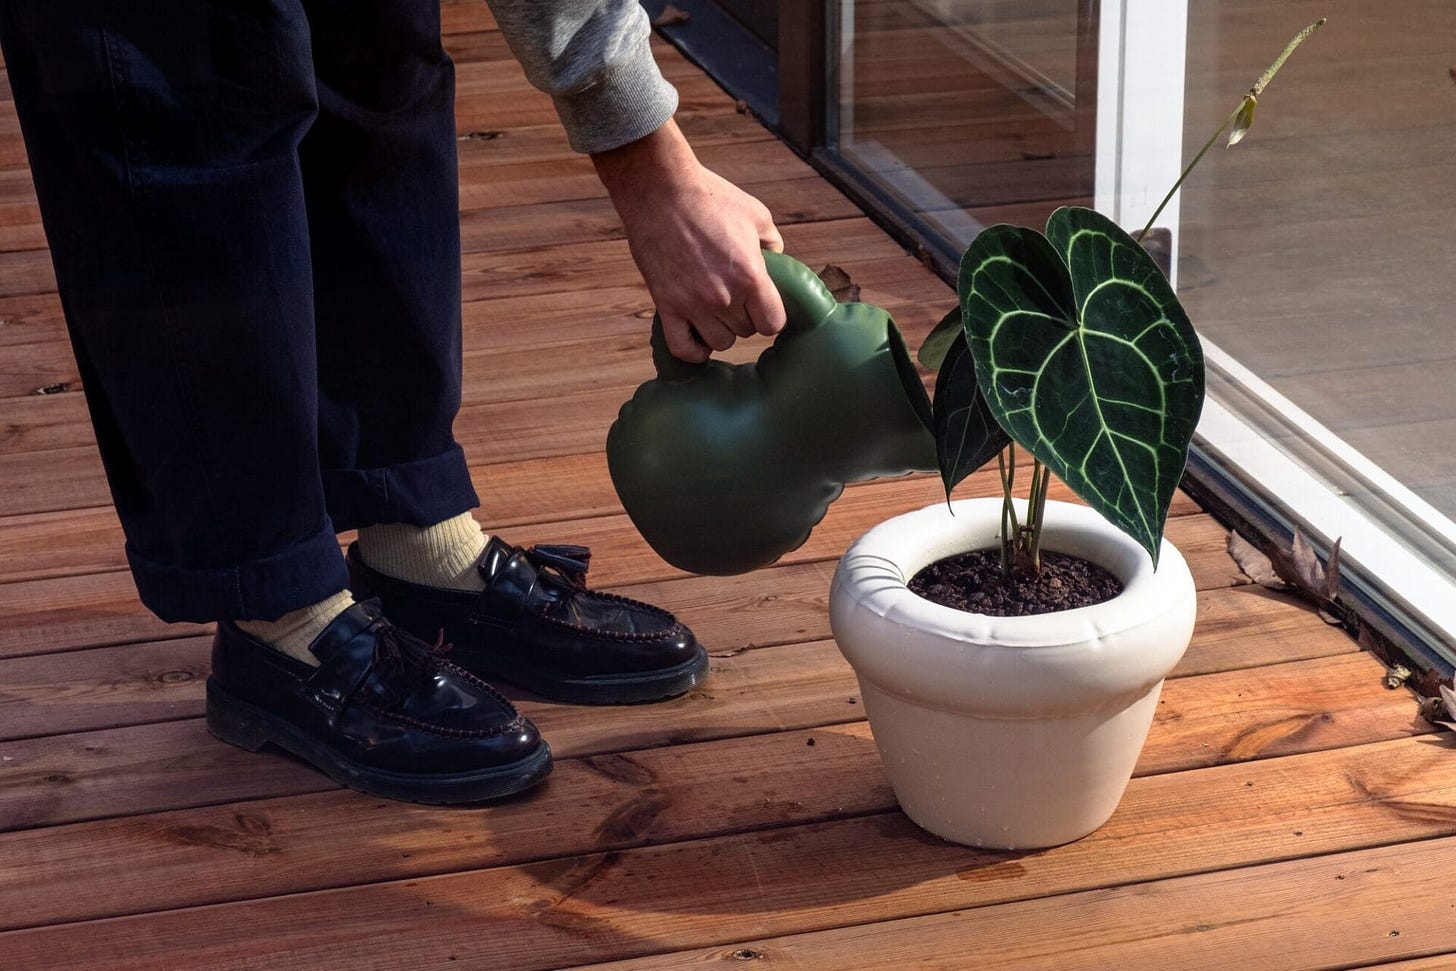 a person shown from the knees down pours water from a green pitcher into a plant in a white vase, both objects appearing inflated but actually made of ceramic